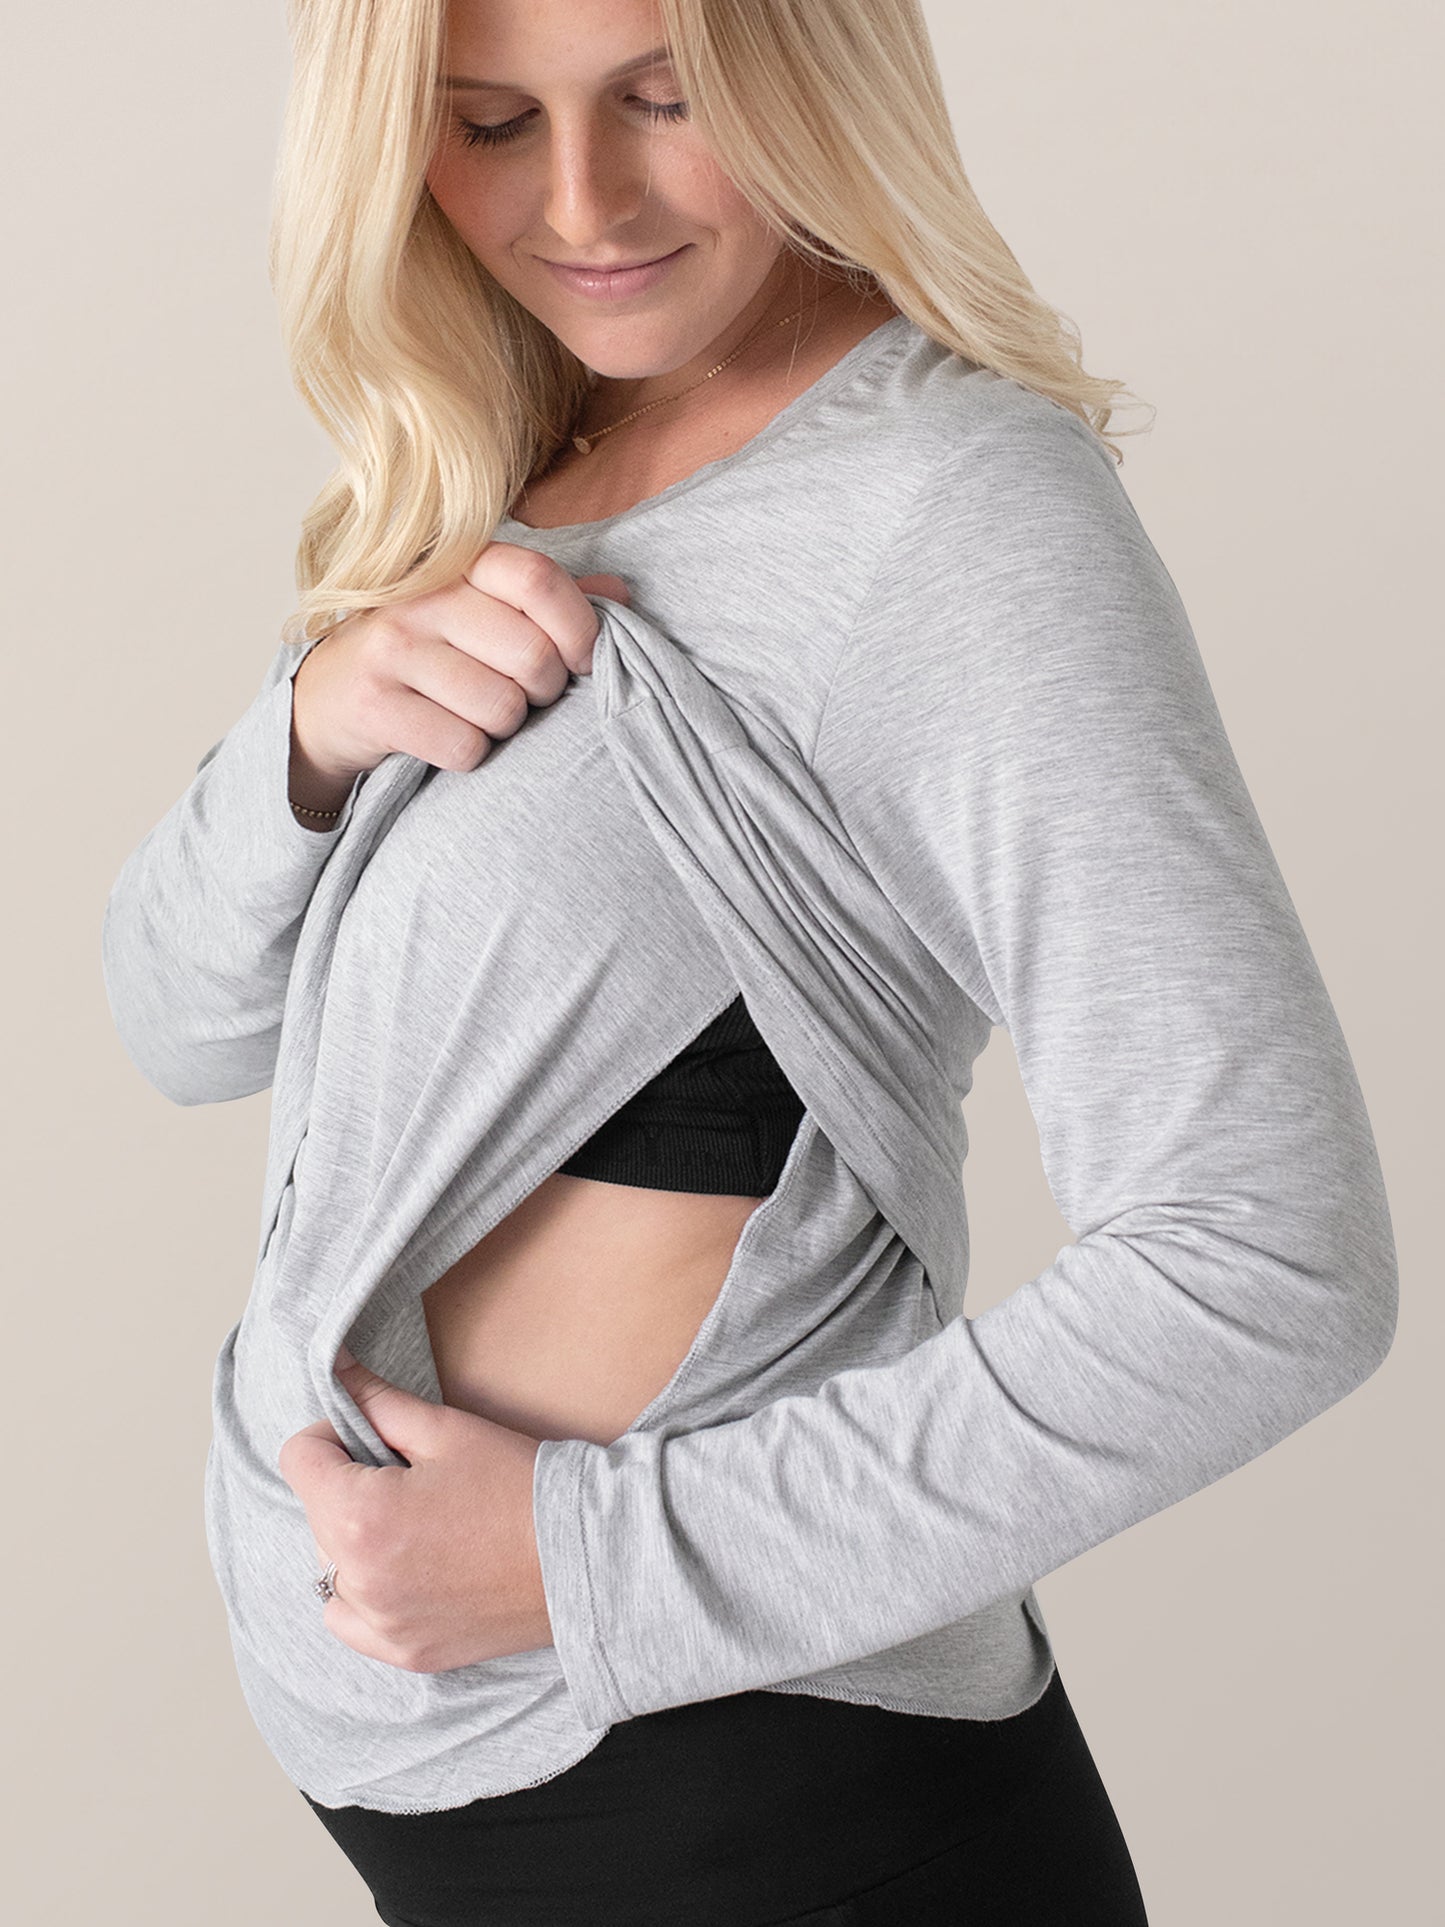 Pregnant model showing the  Bamboo Maternity & Nursing Long Sleeve T-shirt in Grey Heather pull up nursing cover